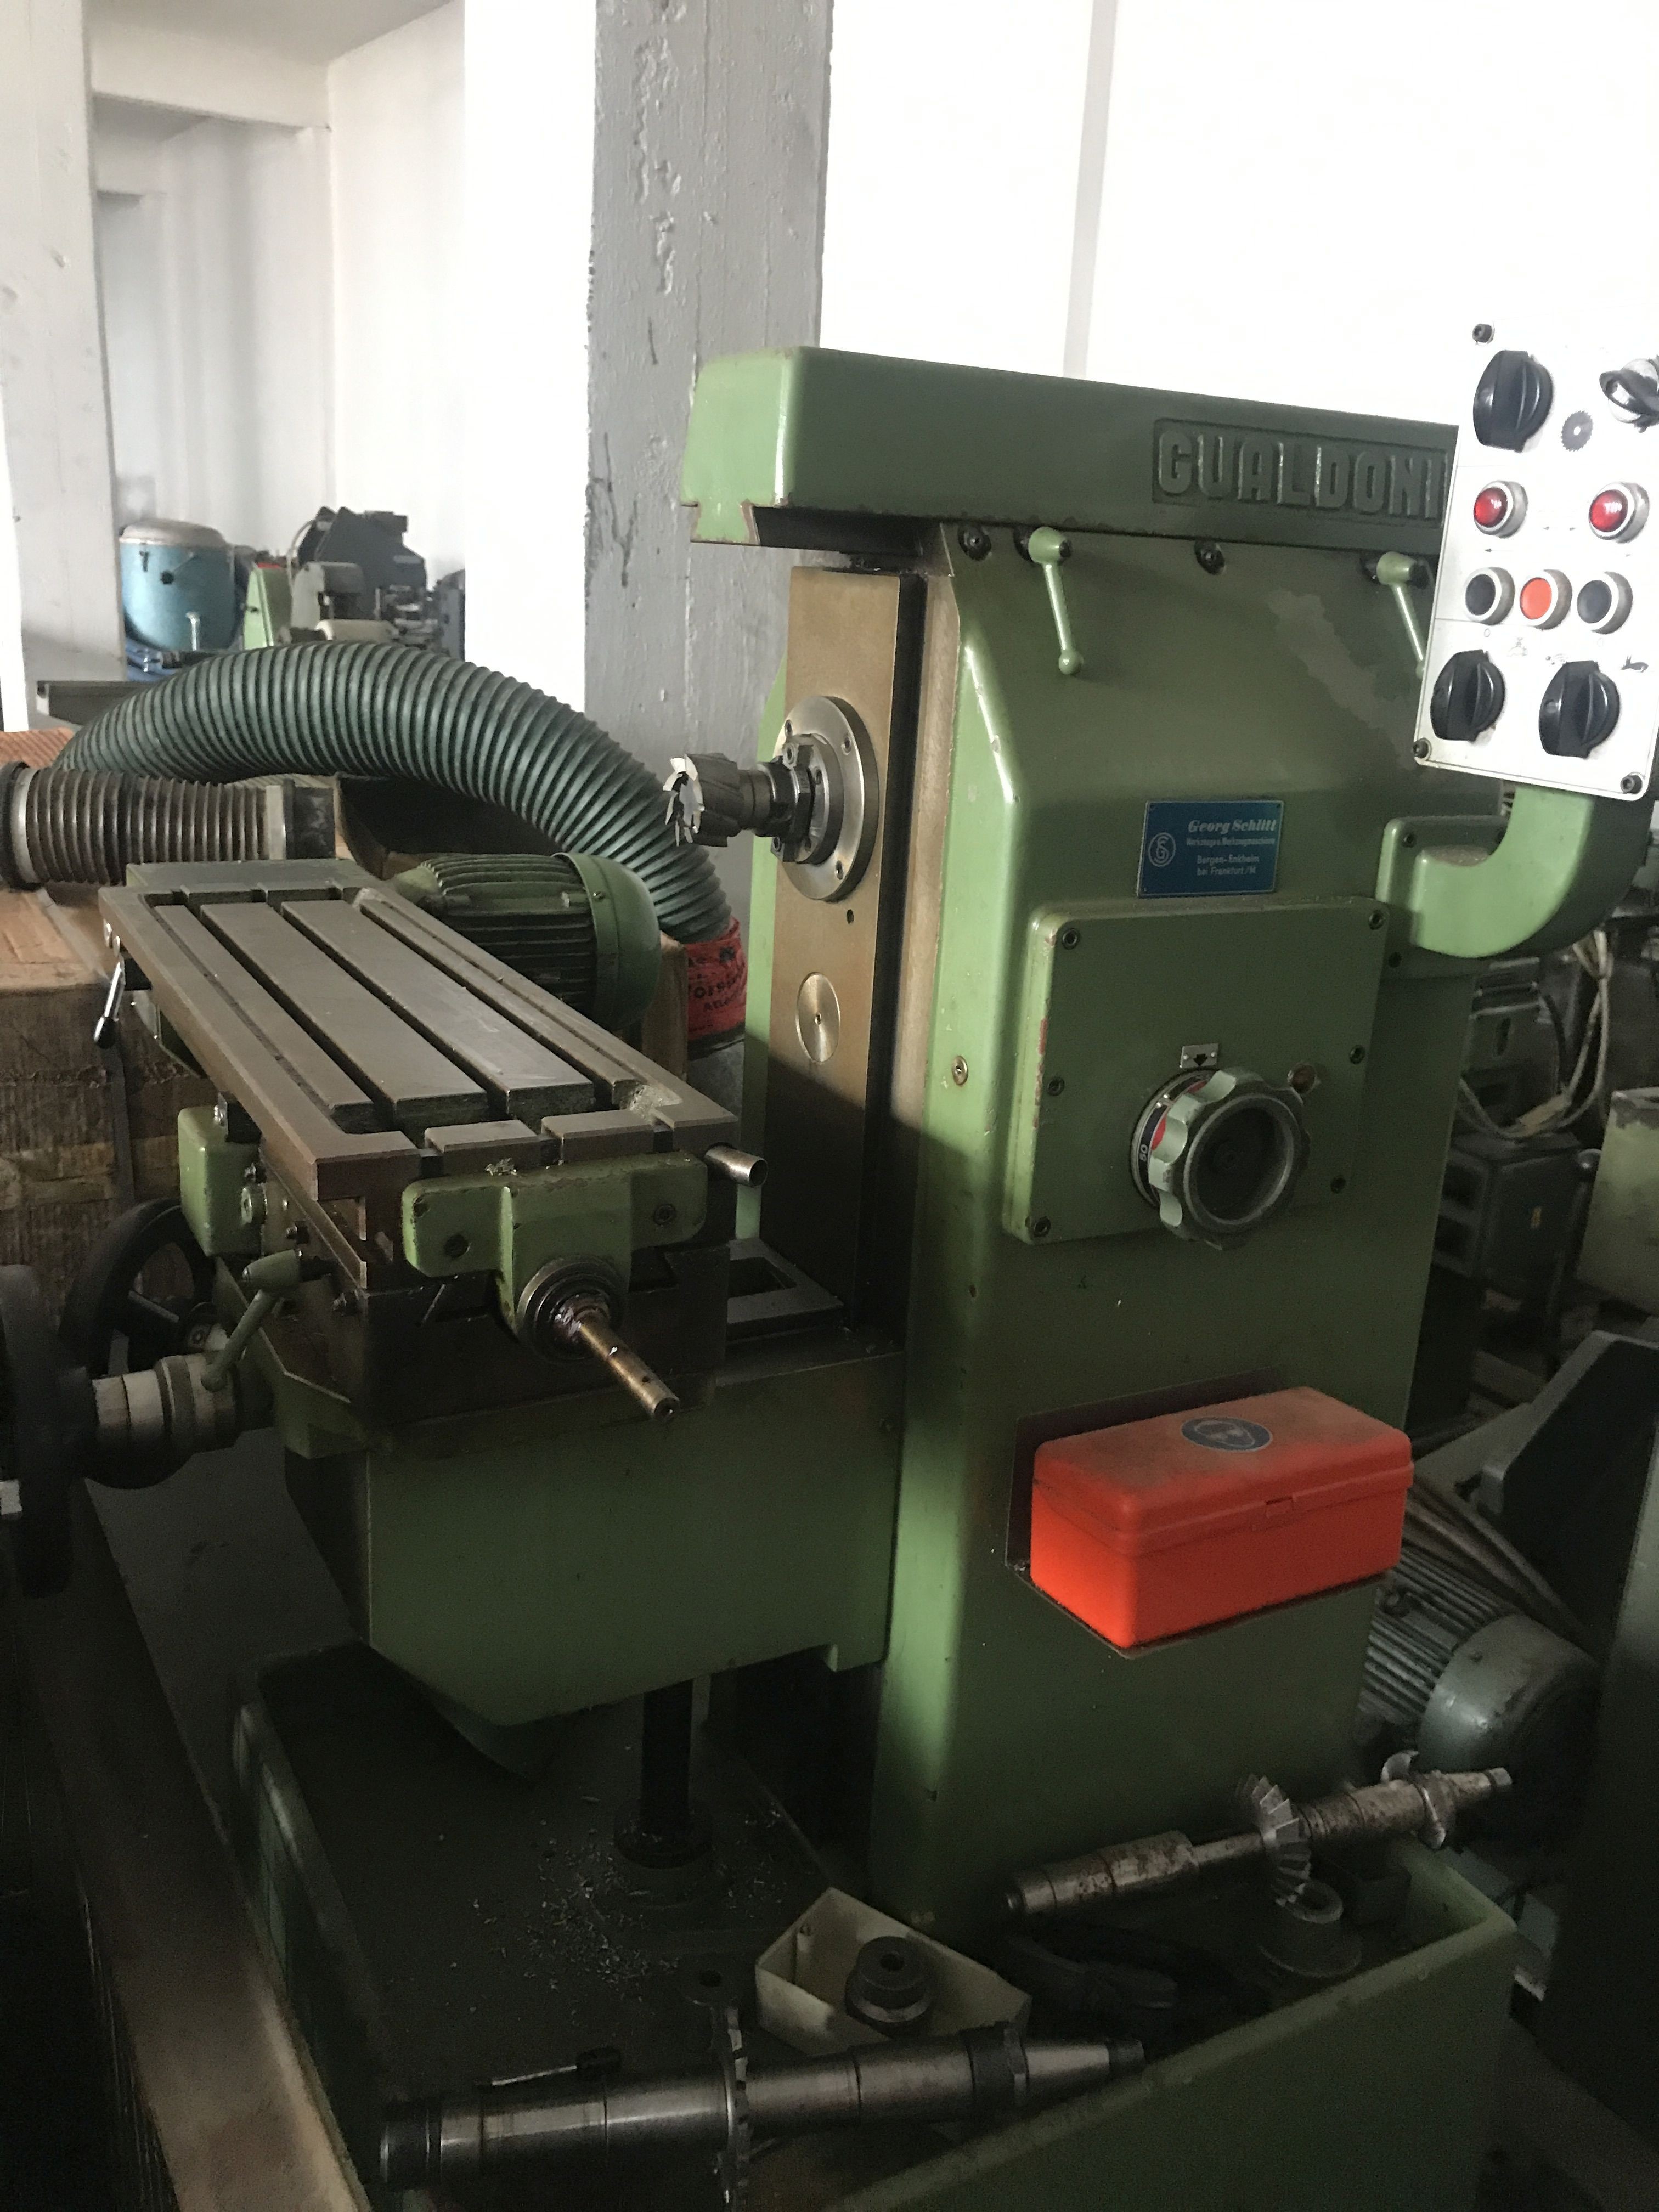 Milling machine conventional GUALDONI G 61 Z photo on Industry-Pilot